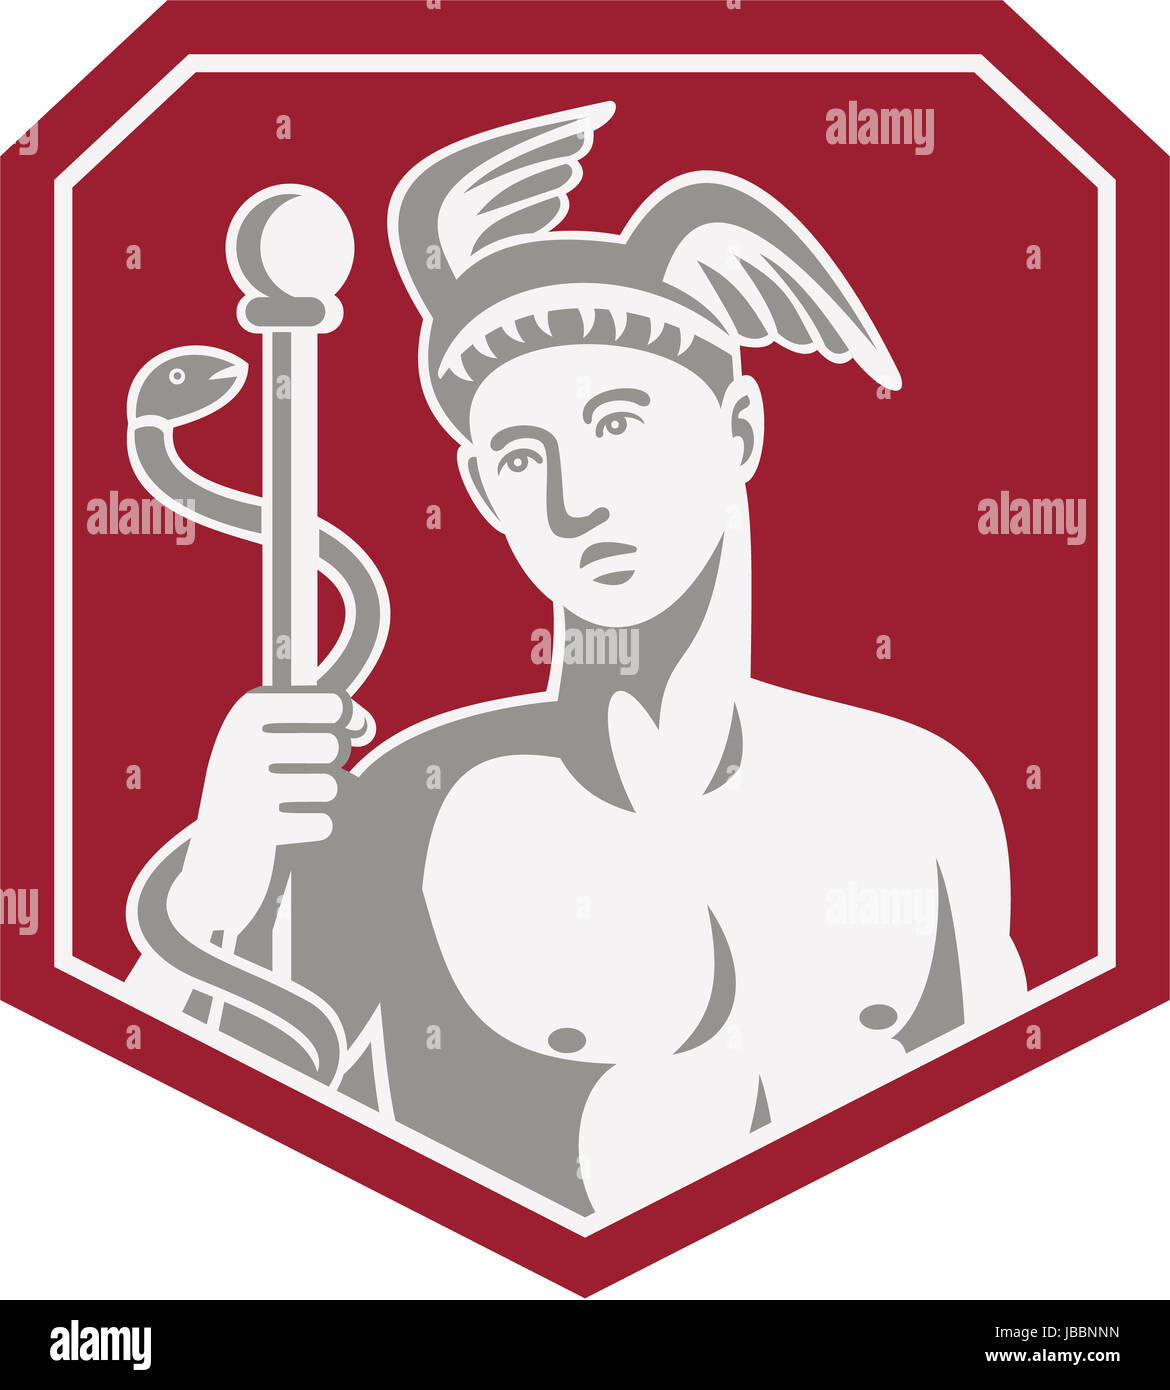 Illustration of Roman god Mercury wearing winged hat holding caduceus a herald's staff with two entwined snakes looking to side set inside shield on isolated background done in retro style. Stock Photo